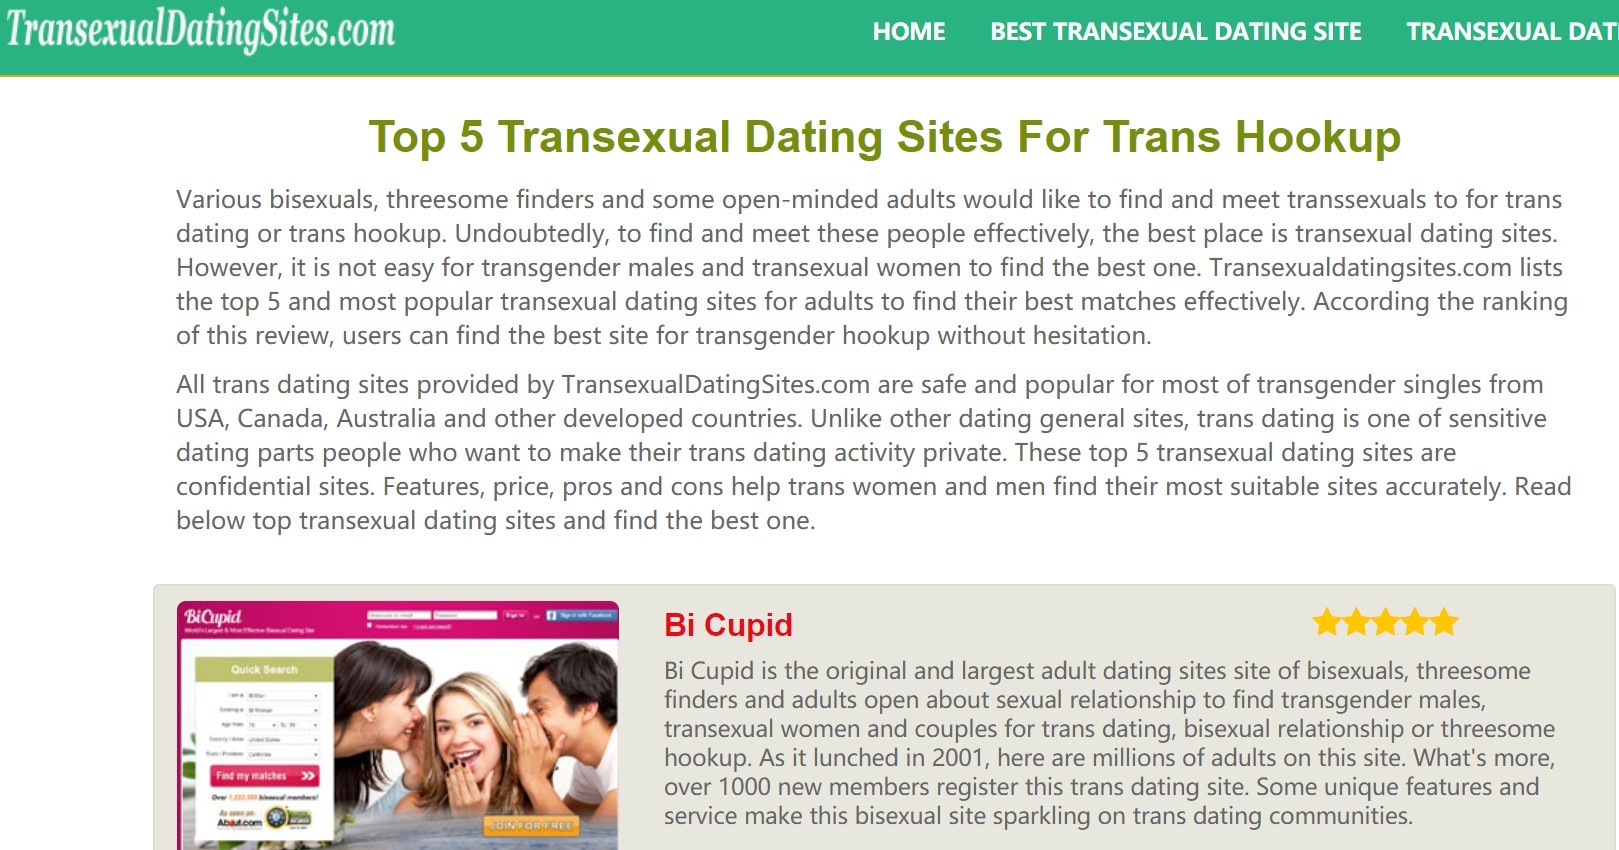 Tips for dating trannies